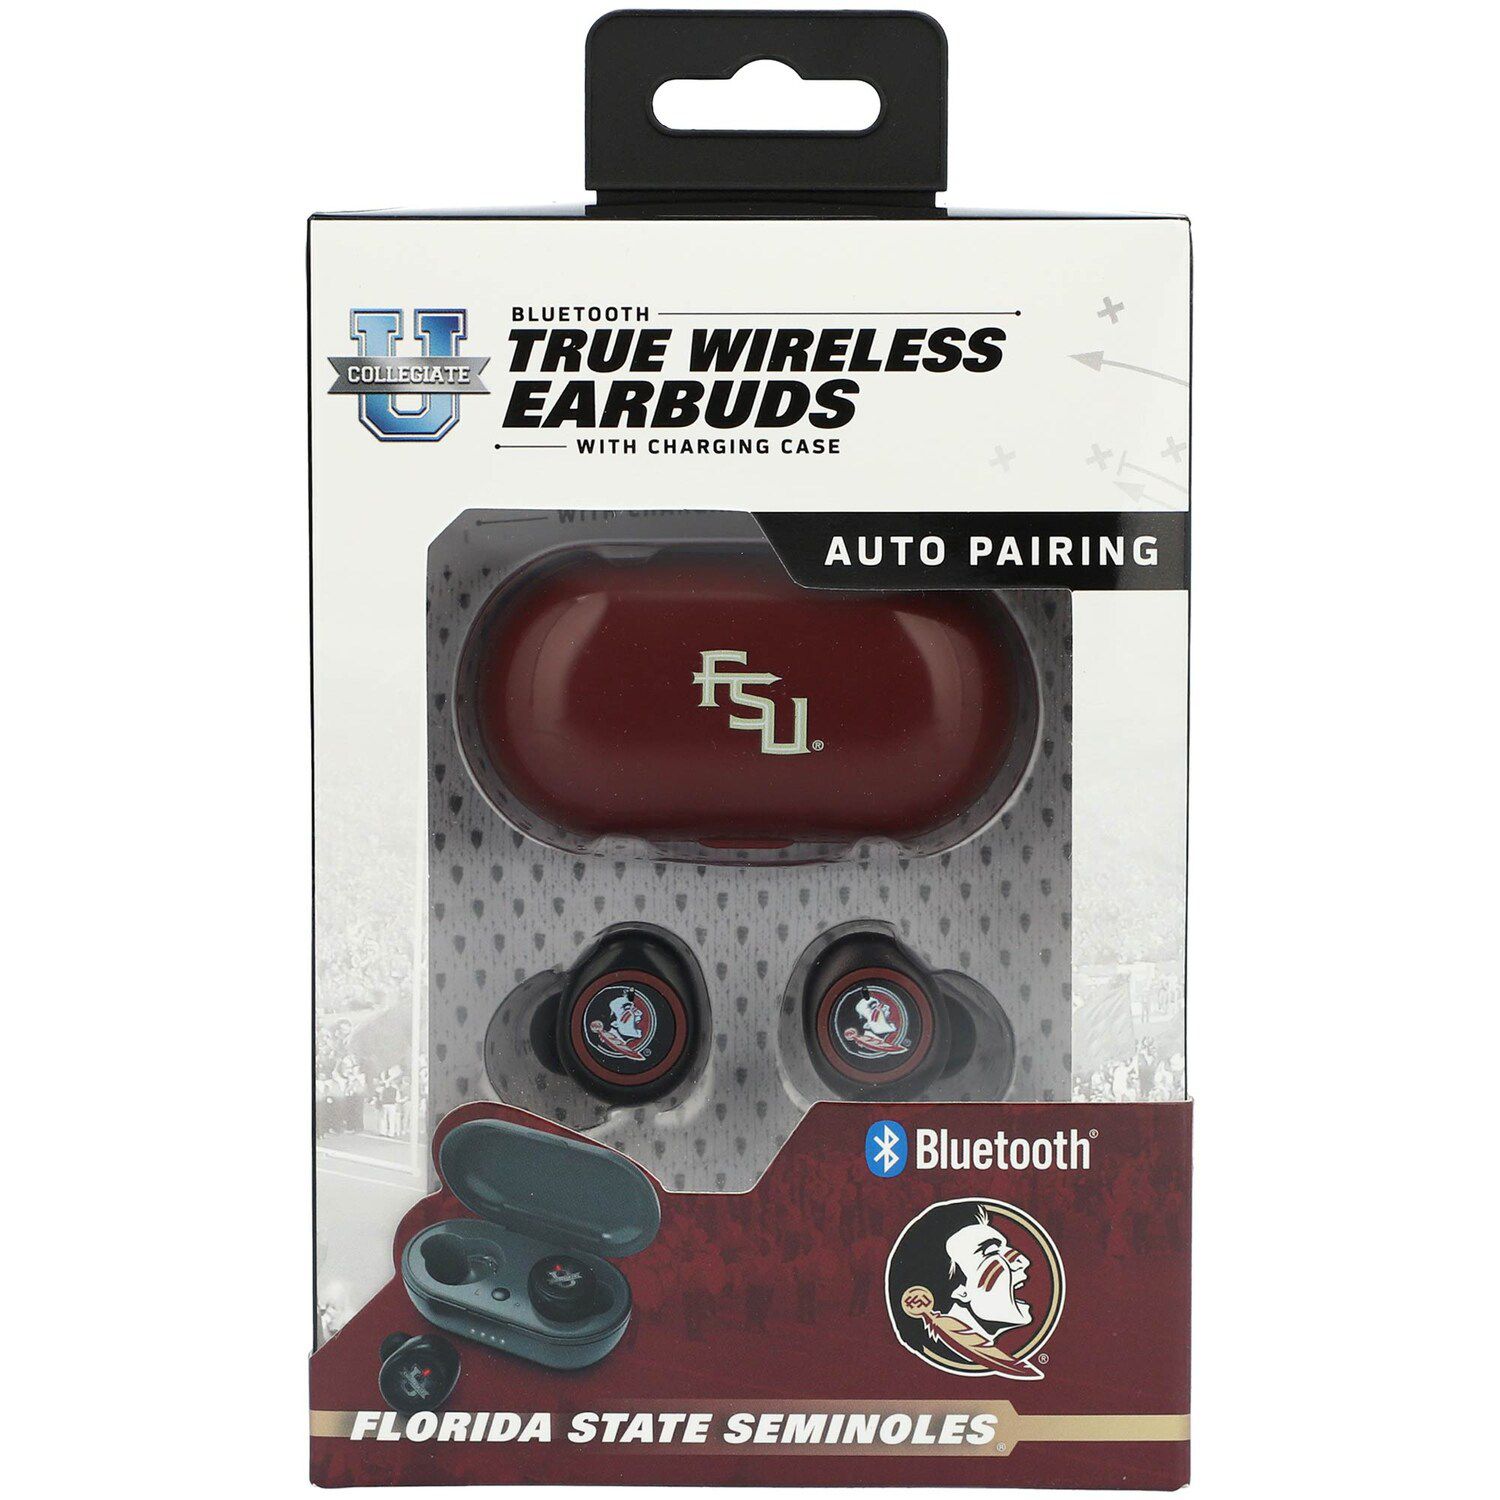 Image for Unbranded Florida State Seminoles True Wireless Earbuds at Kohl's.